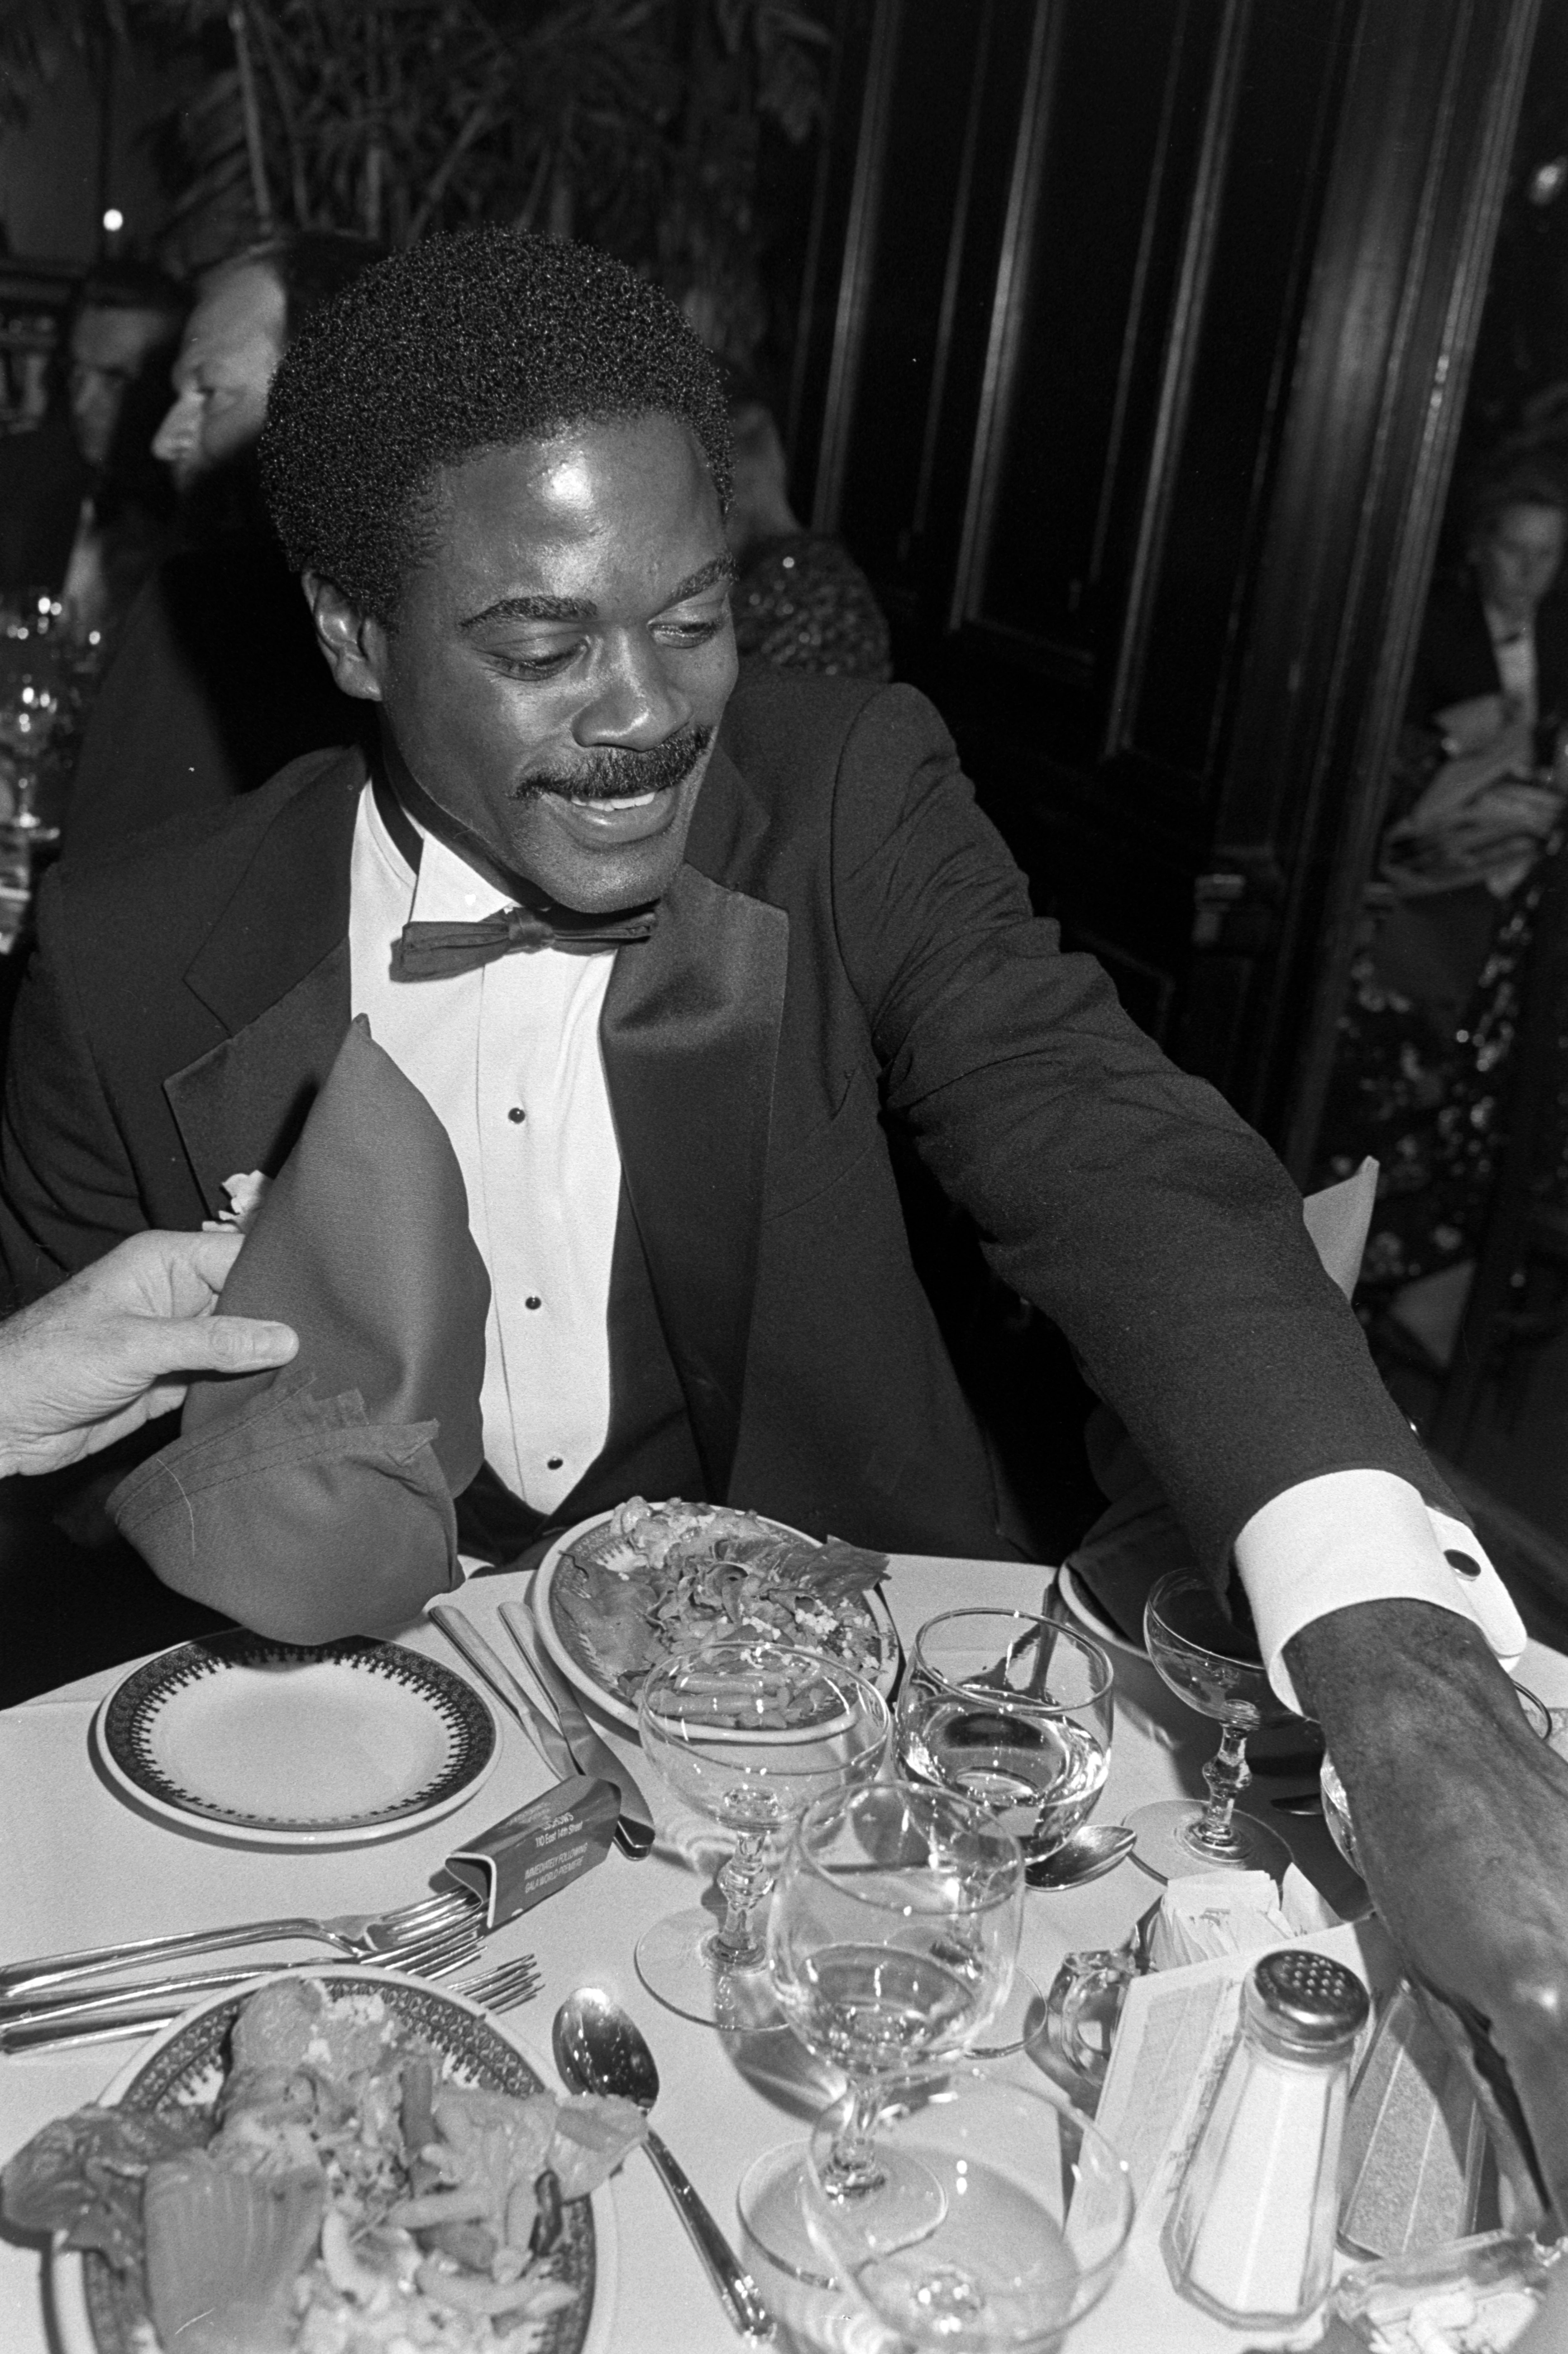 Howard E. Rollins Jr. attends a party at Luchow's, a restaurant in New York City, on November 18, 1981. | Source: Getty Images